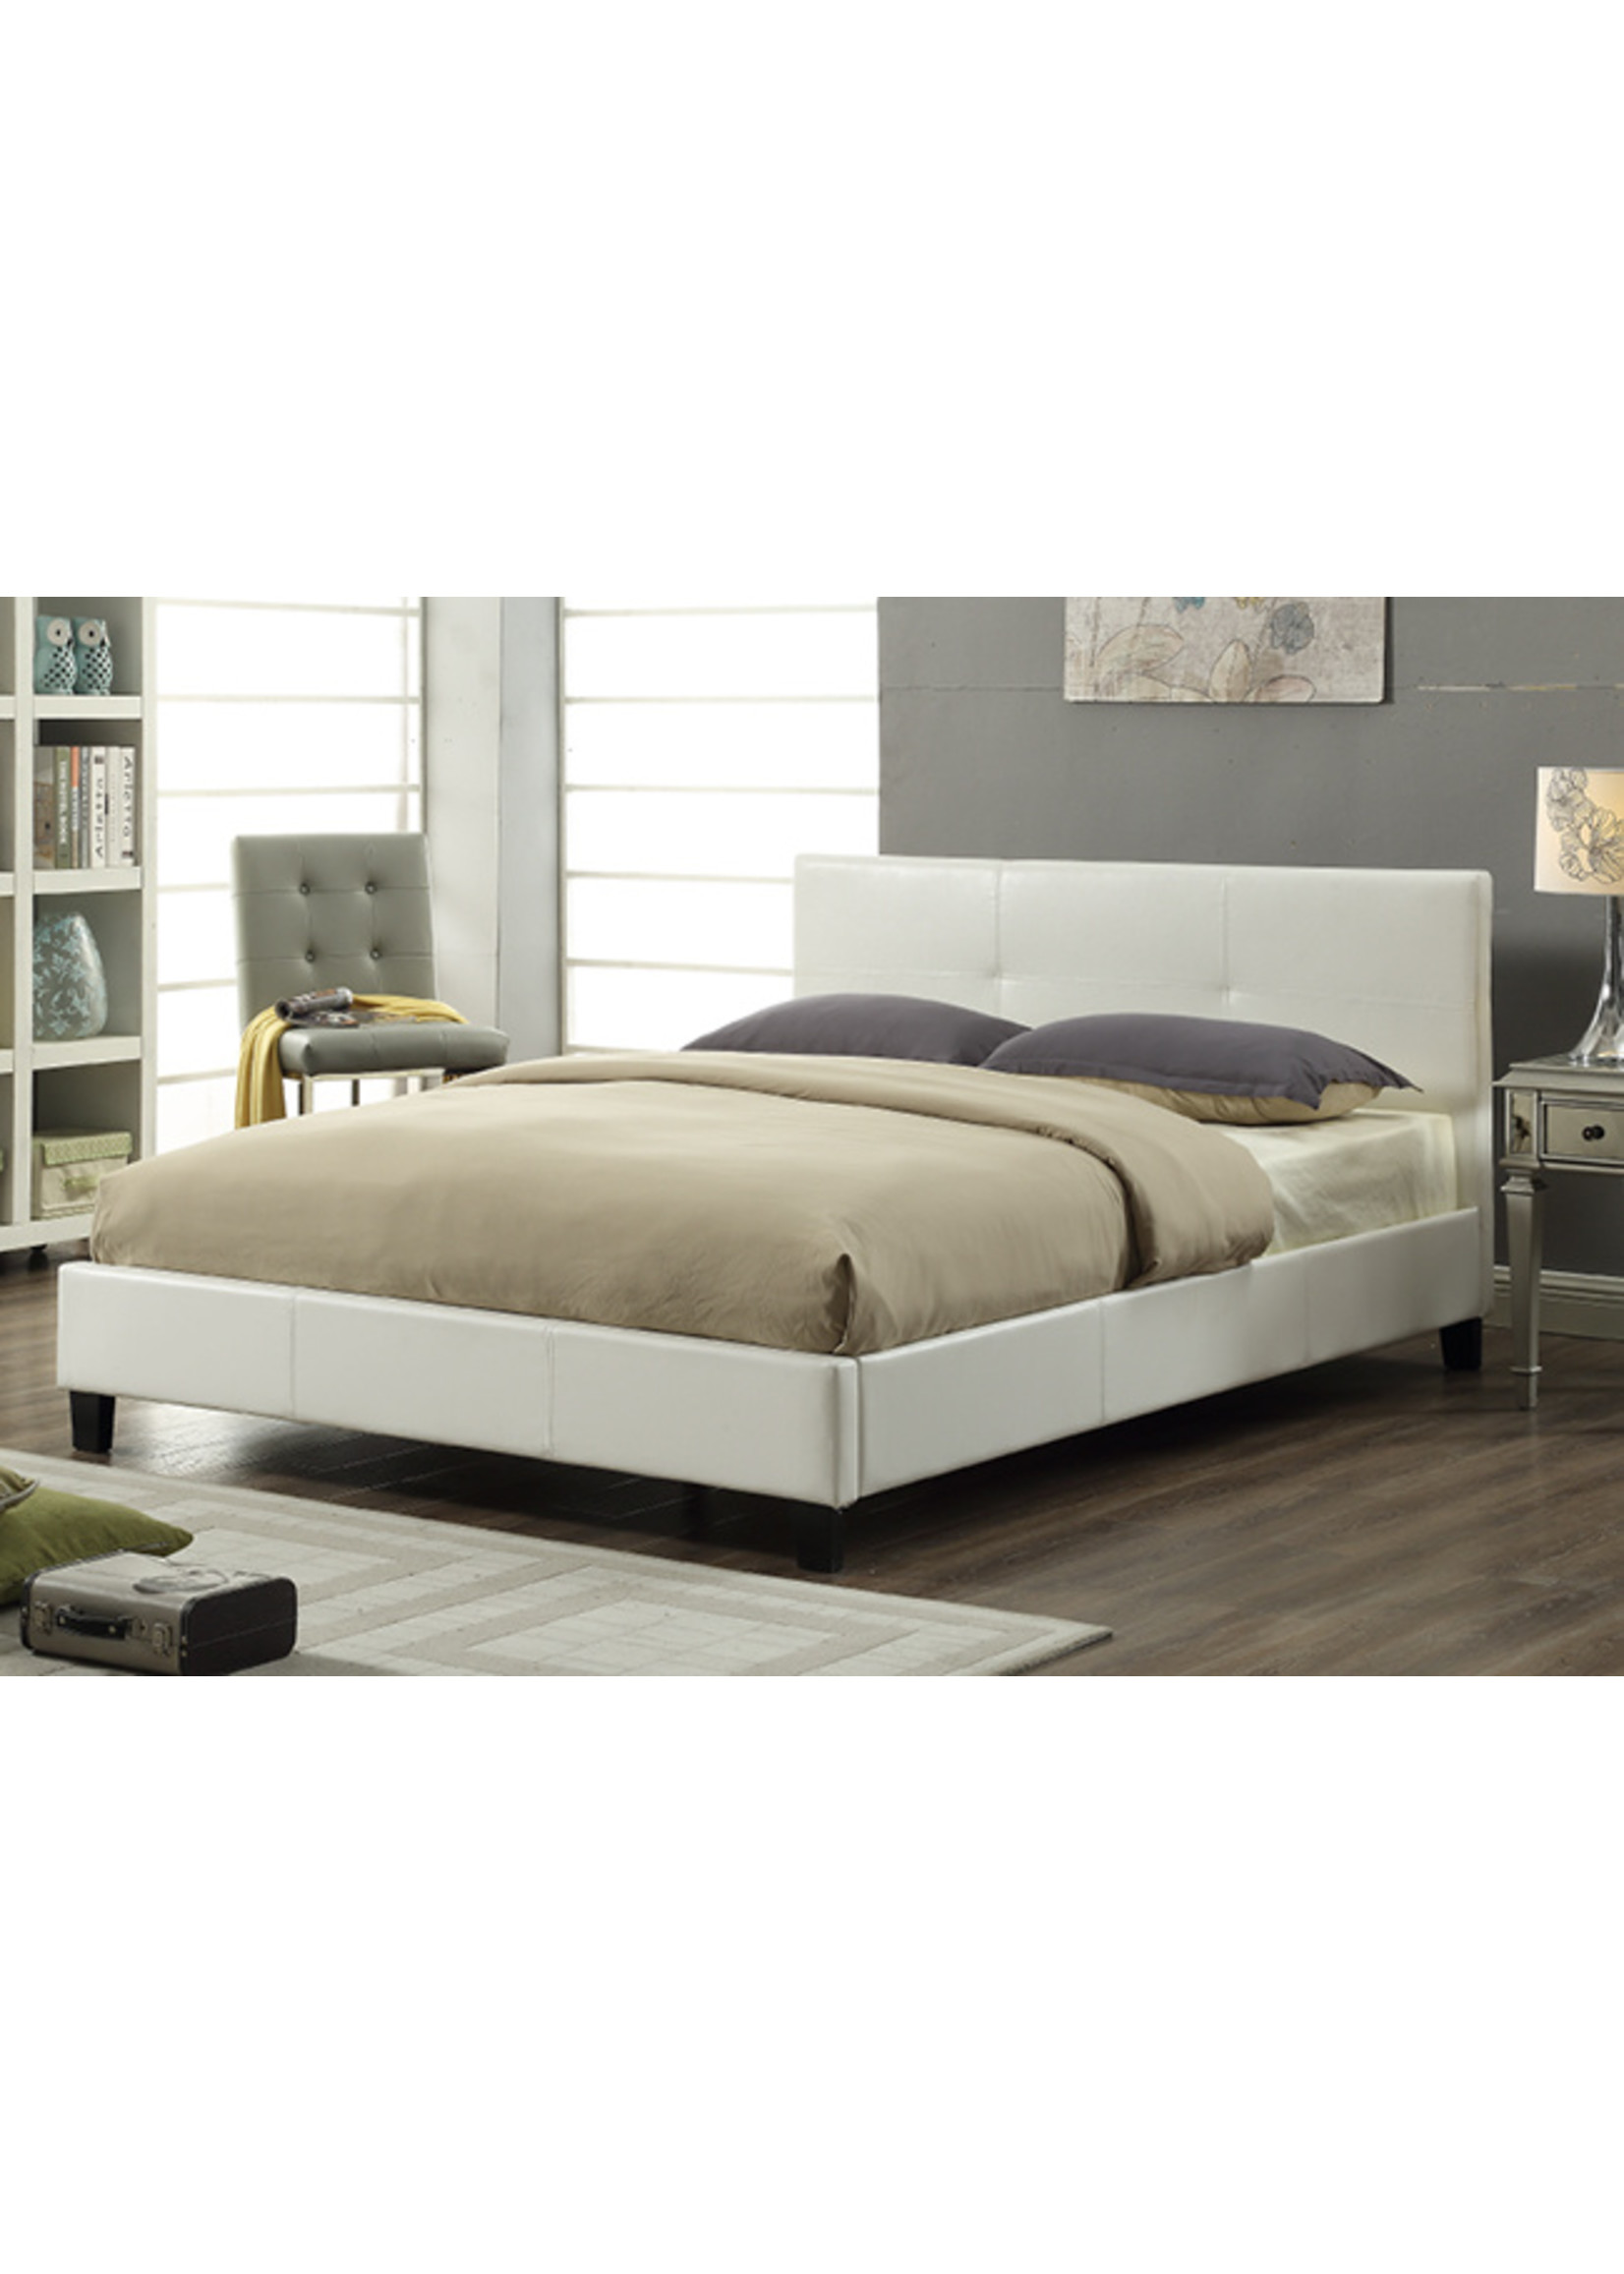 QUEEN WHITE FAUX LEATHER BED  FRAME